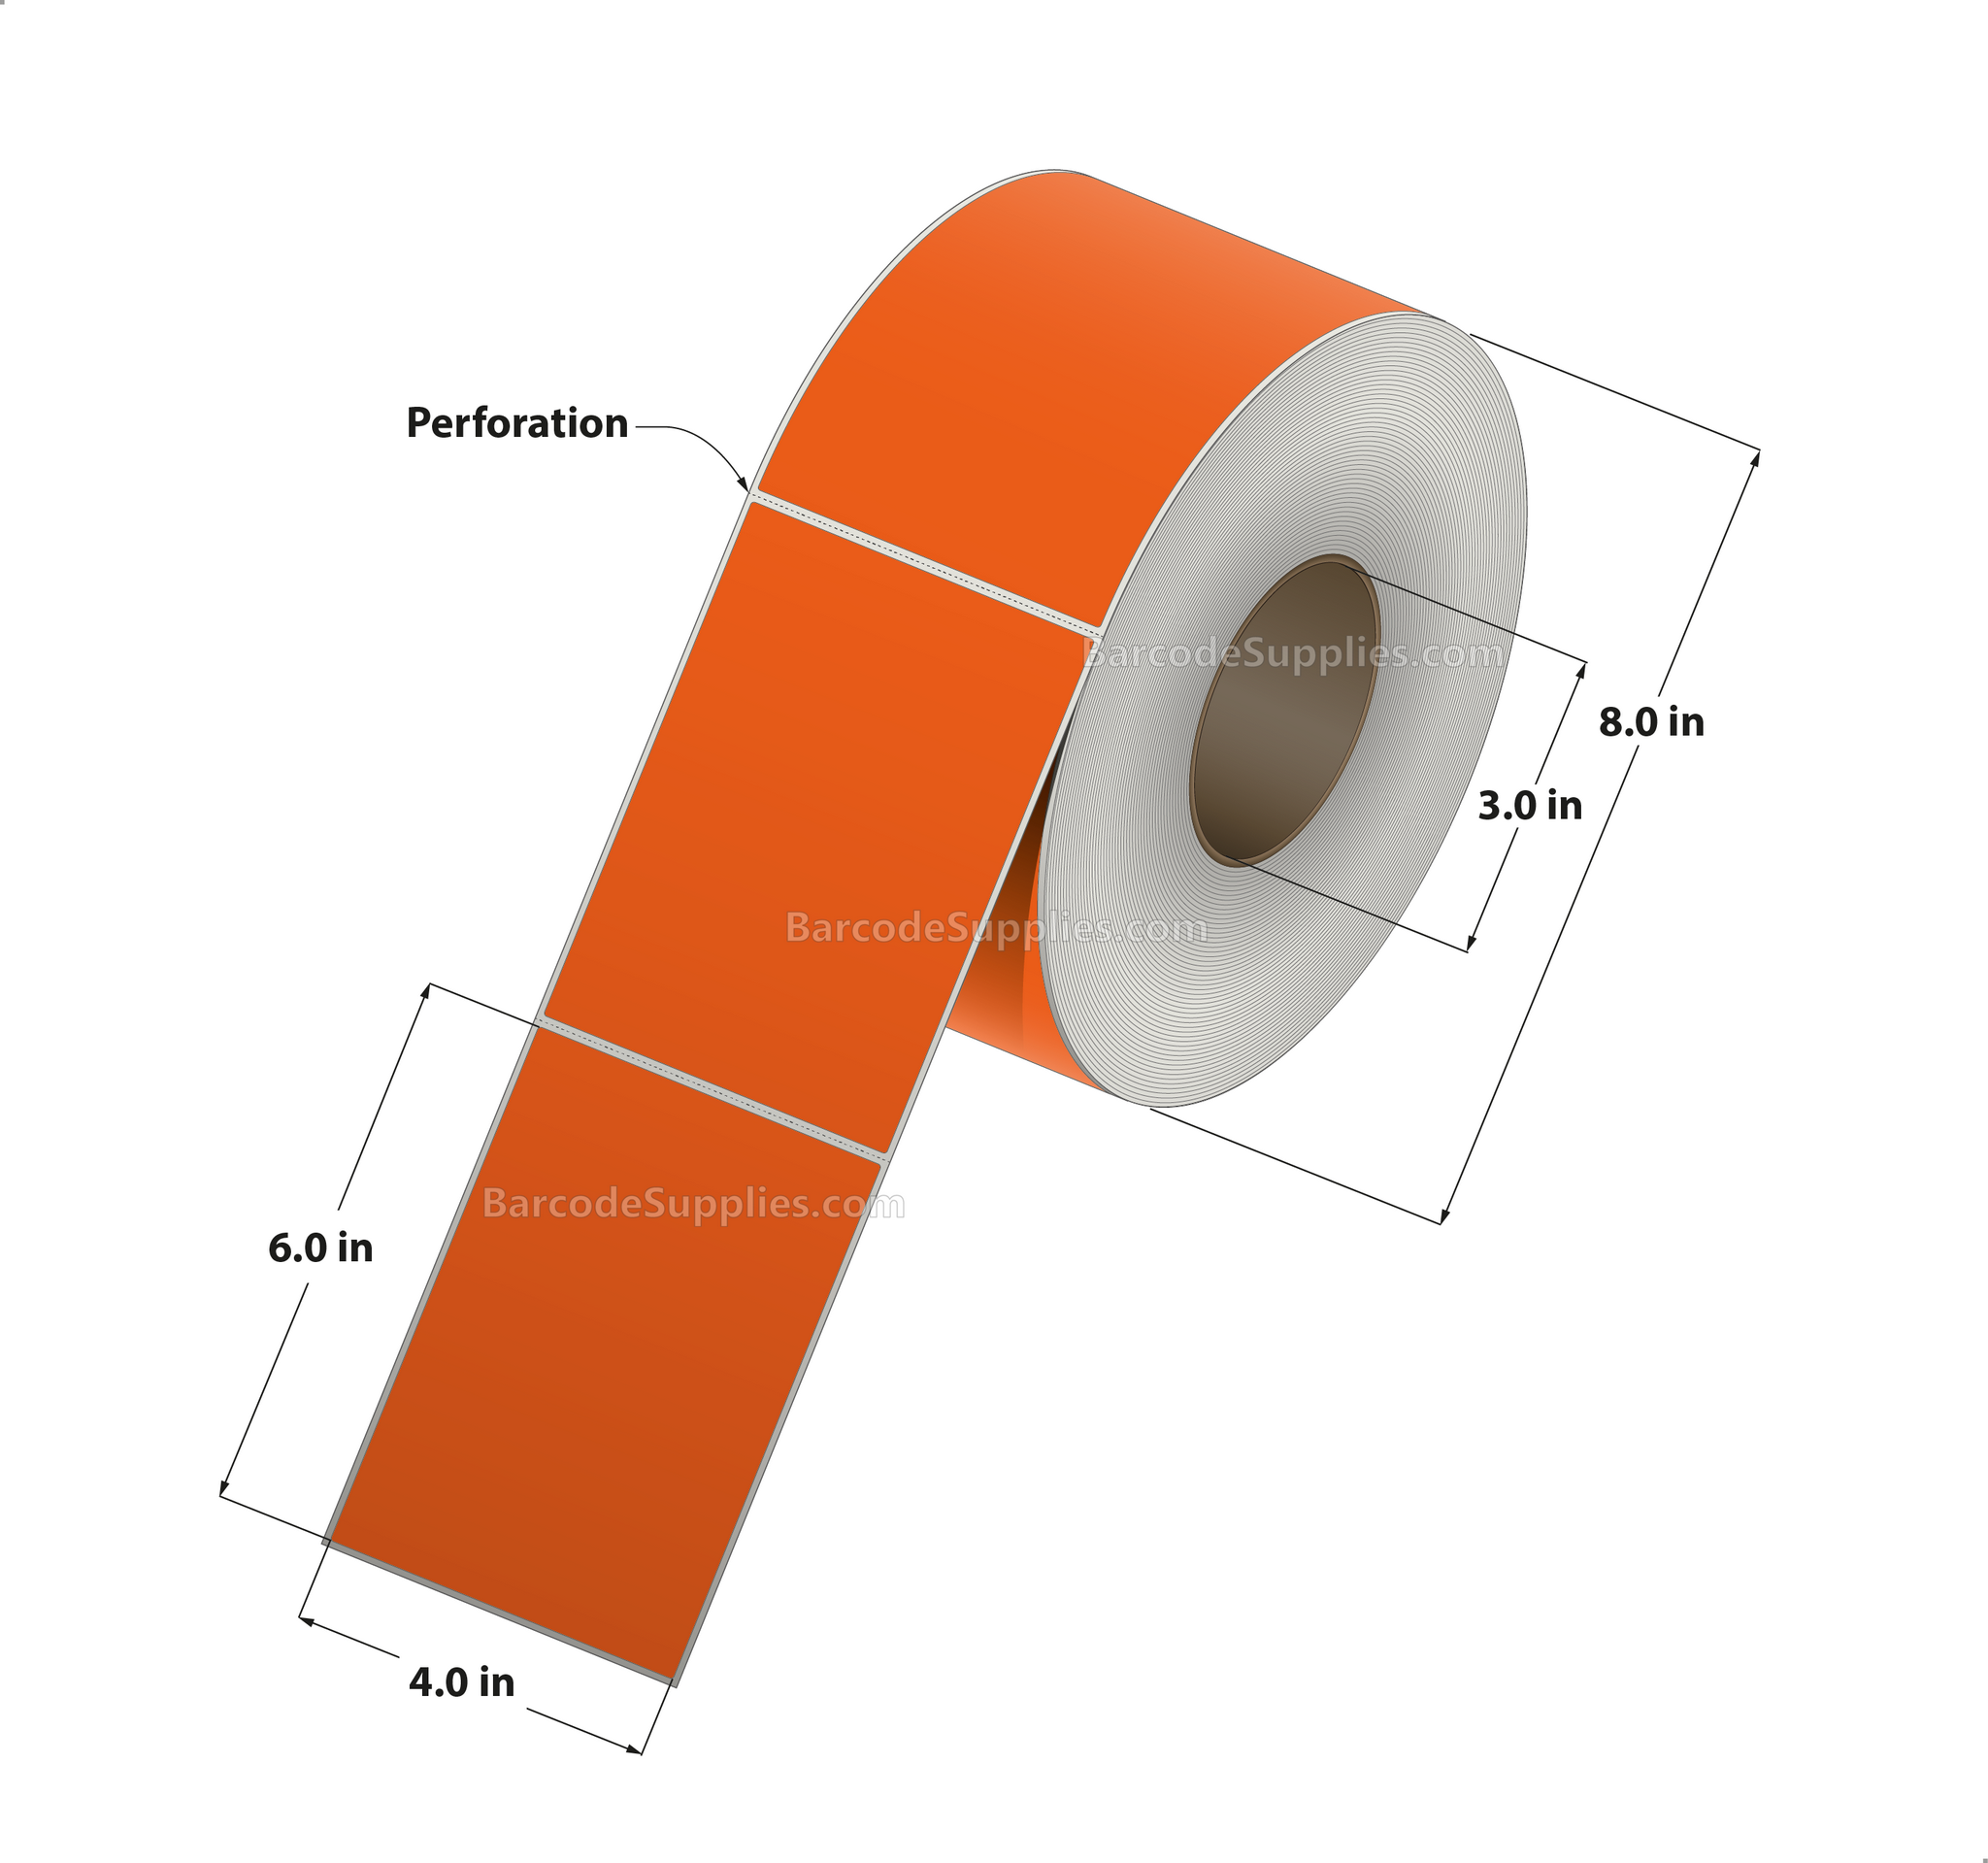 4 x 6 Thermal Transfer Fluorescent Orange Labels With Permanent Acrylic Adhesive - Perforated - 1000 Labels Per Roll - Carton Of 4 Rolls - 4000 Labels Total - MPN: TH46-1PFO